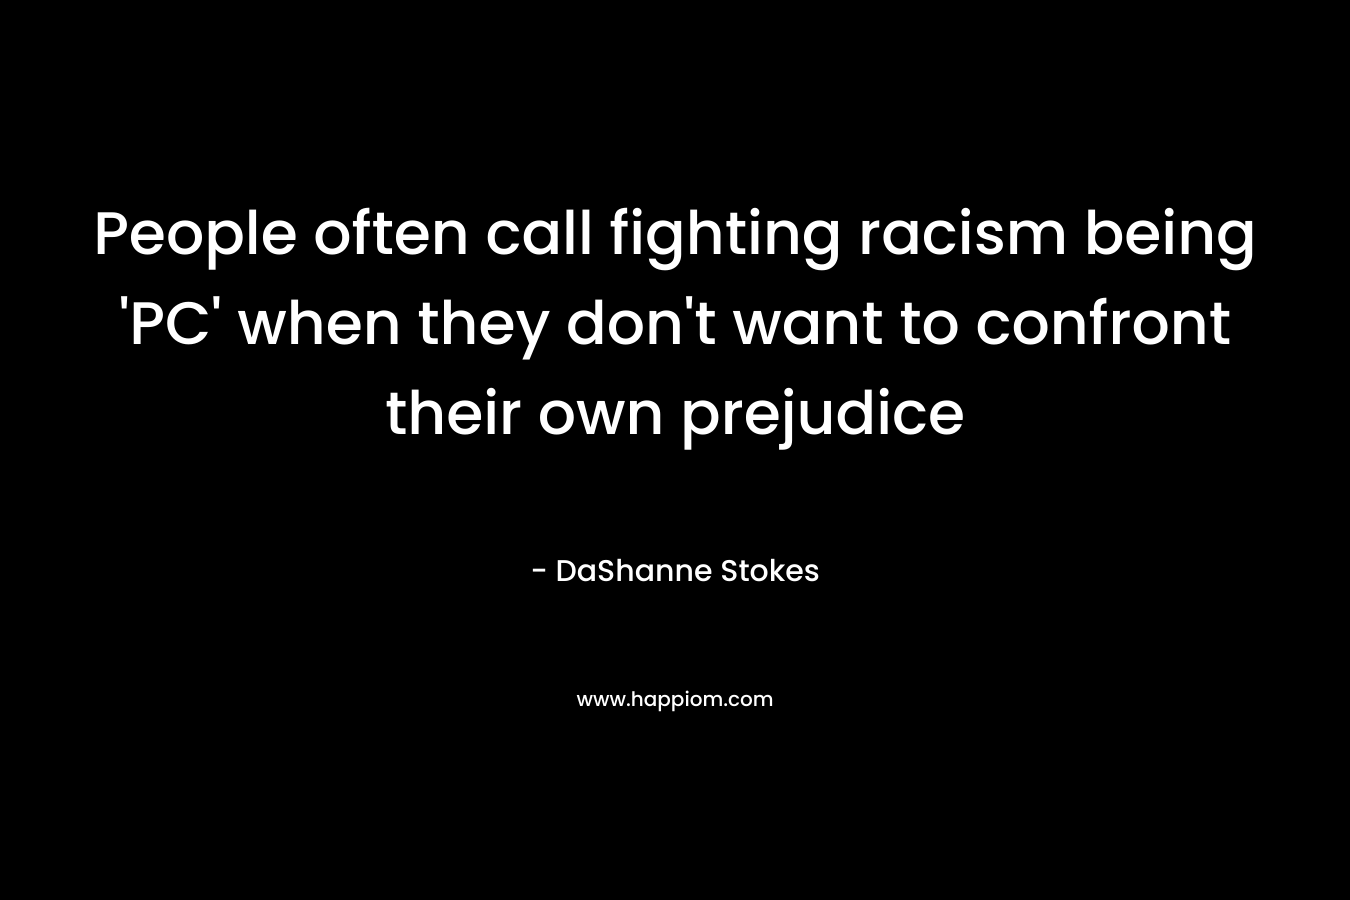 People often call fighting racism being 'PC' when they don't want to confront their own prejudice